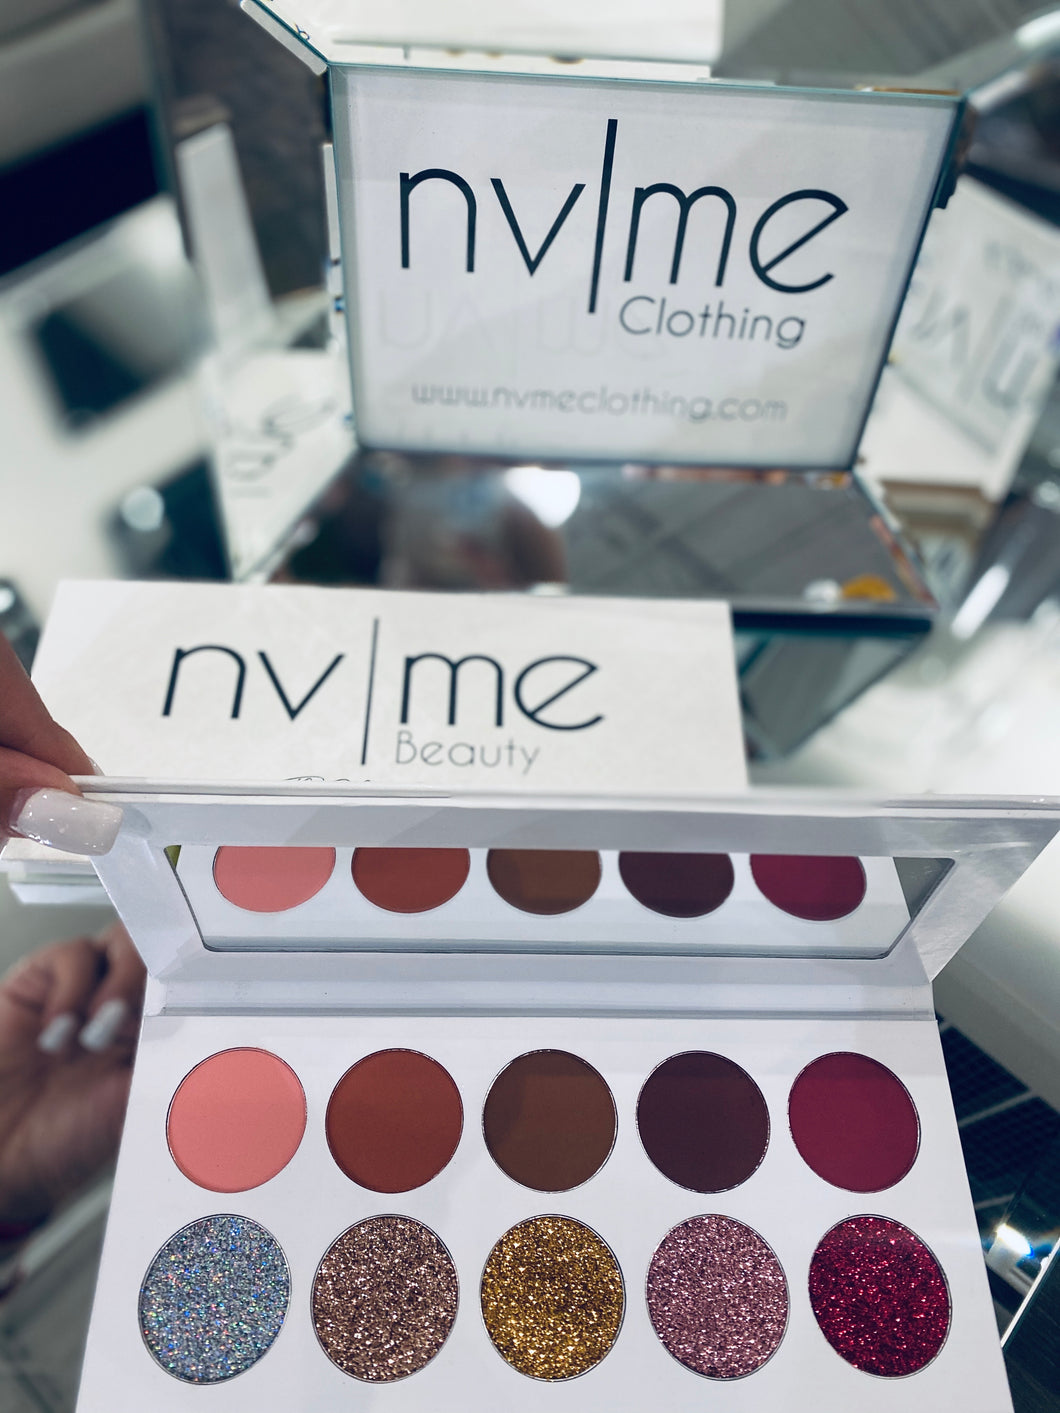 nv|me Beauty - The Glam Palette